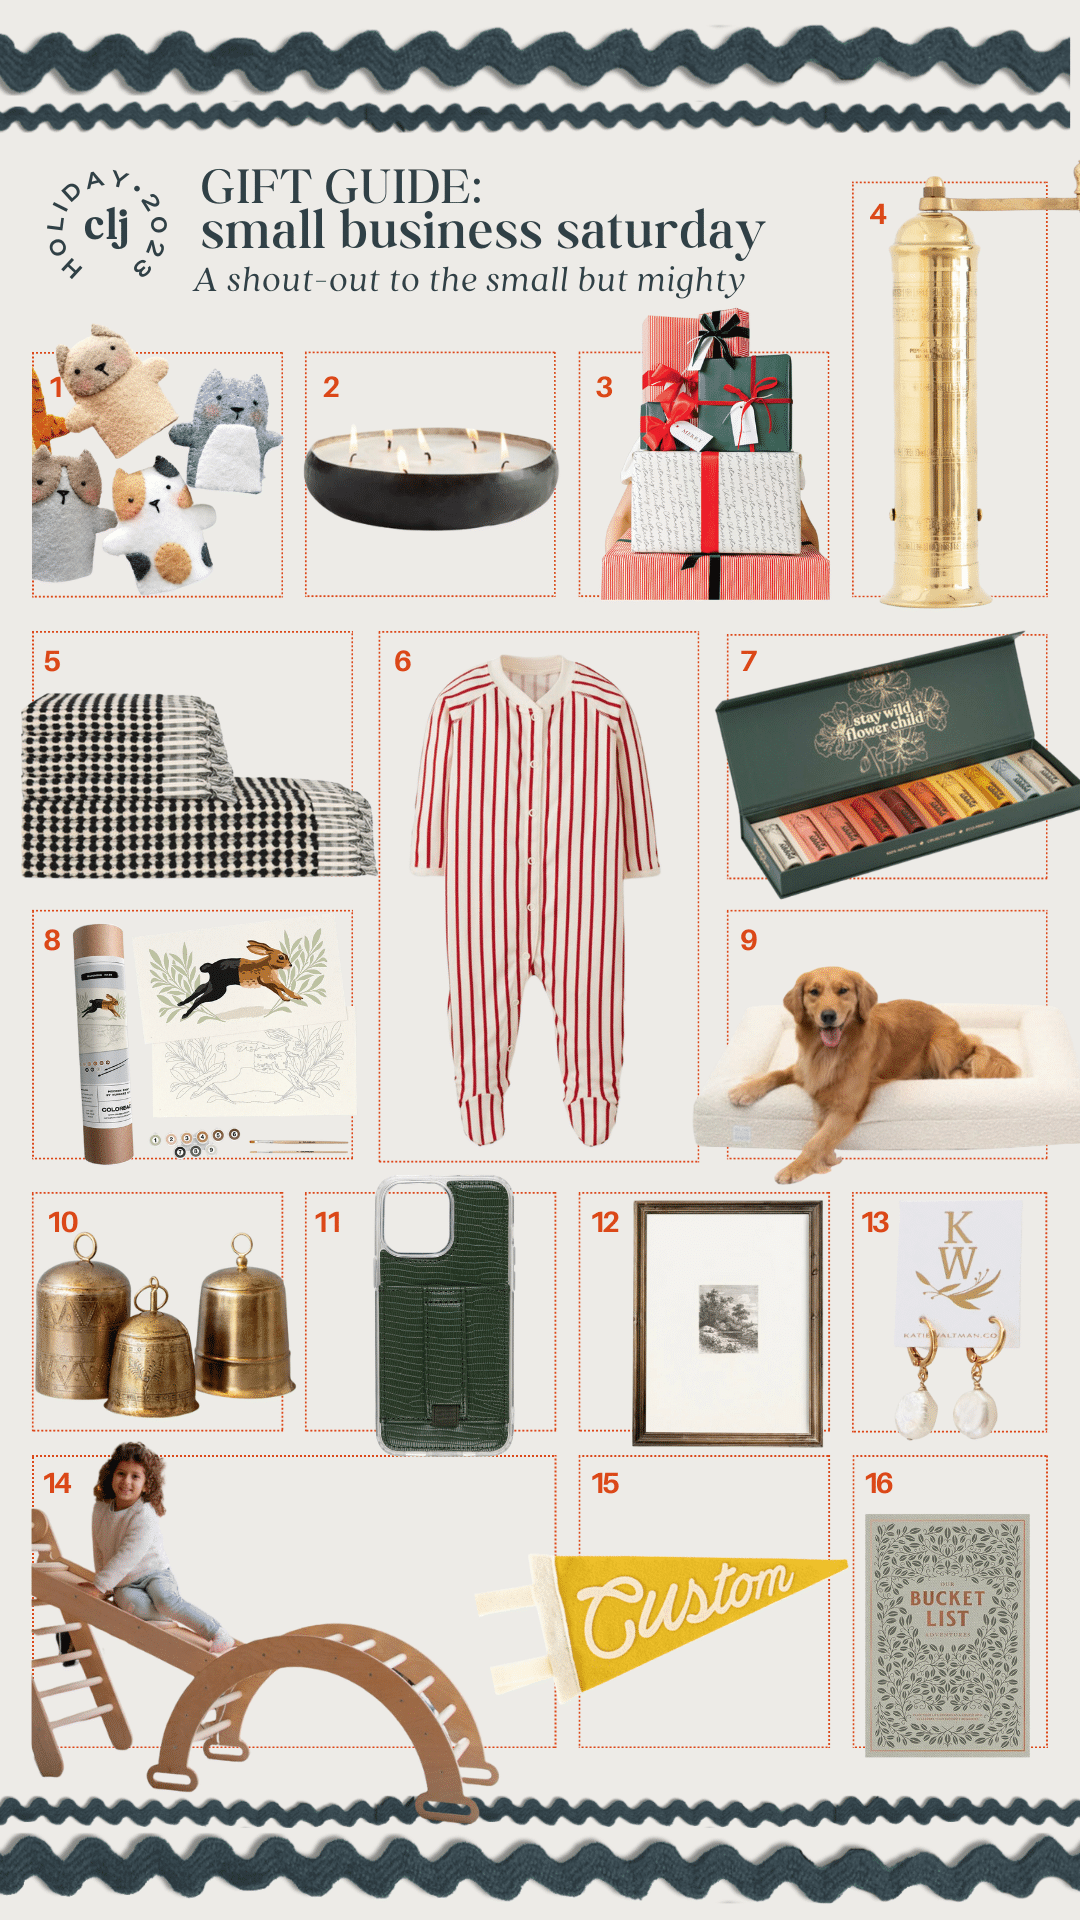 Holiday Gift Guide: Best Kitchen Gifts Under $50! - The Cottage Market